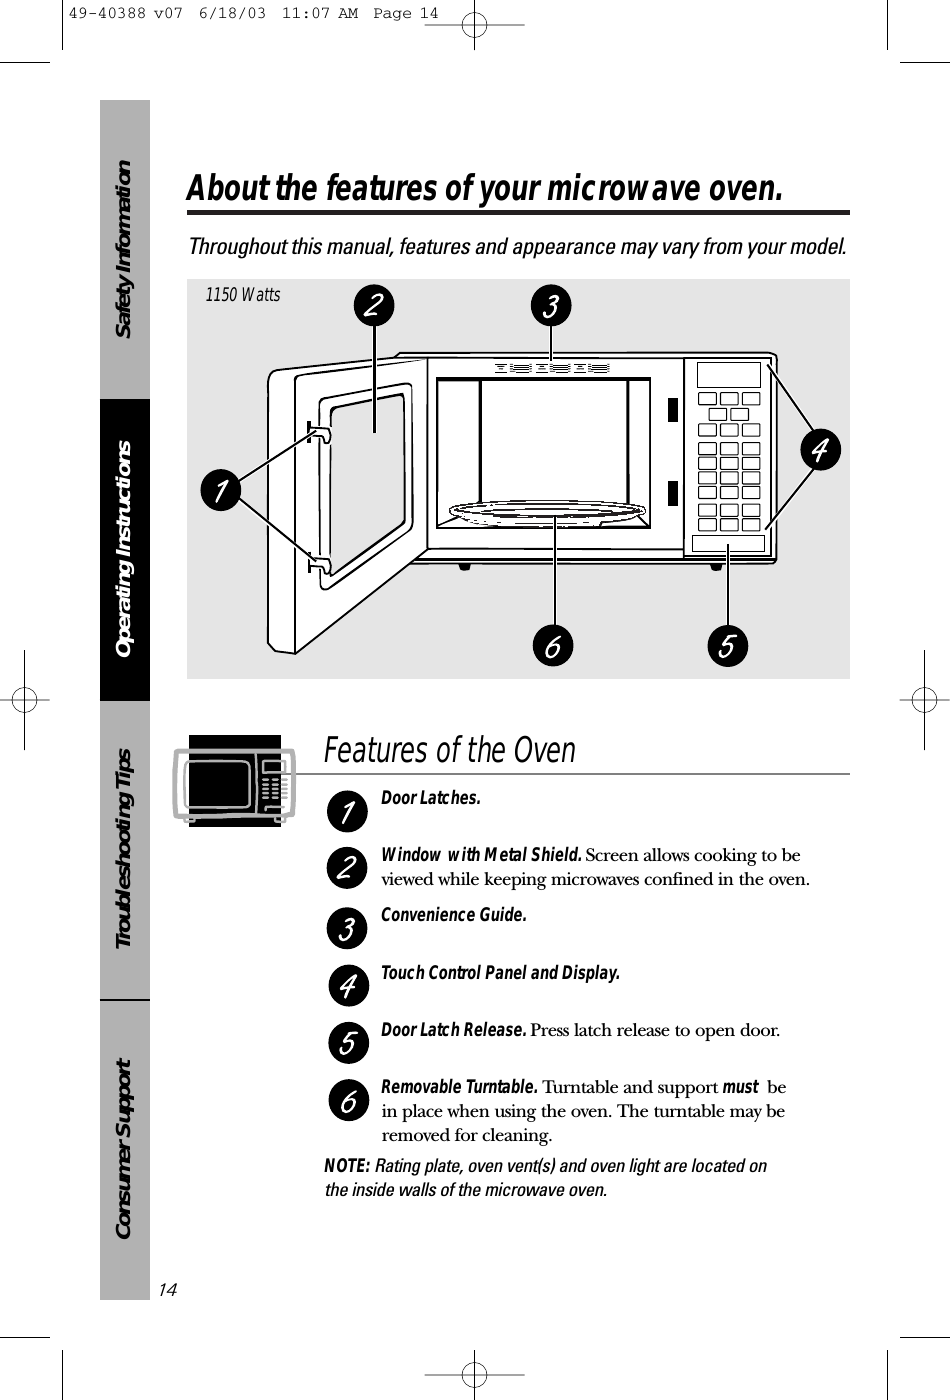 Safety InformationOperating InstructionsTroubleshooting TipsConsumer SupportAbout the features of your microwave oven.Throughout this manual, features and appearance may vary from your model.141150 WattsFeatures of the OvenDoor Latches.Window with Metal Shield. Screen allows cooking to beviewed while keeping microwaves confined in the oven.Convenience Guide.Touch Control Panel and Display.Door Latch Release. Press latch release to open door.Removable Turntable. Turntable and support must be in place when using the oven. The turntable may beremoved for cleaning.NOTE: Rating plate, oven vent(s) and oven light are located on the inside walls of the microwave oven.49-40388 v07  6/18/03  11:07 AM  Page 14